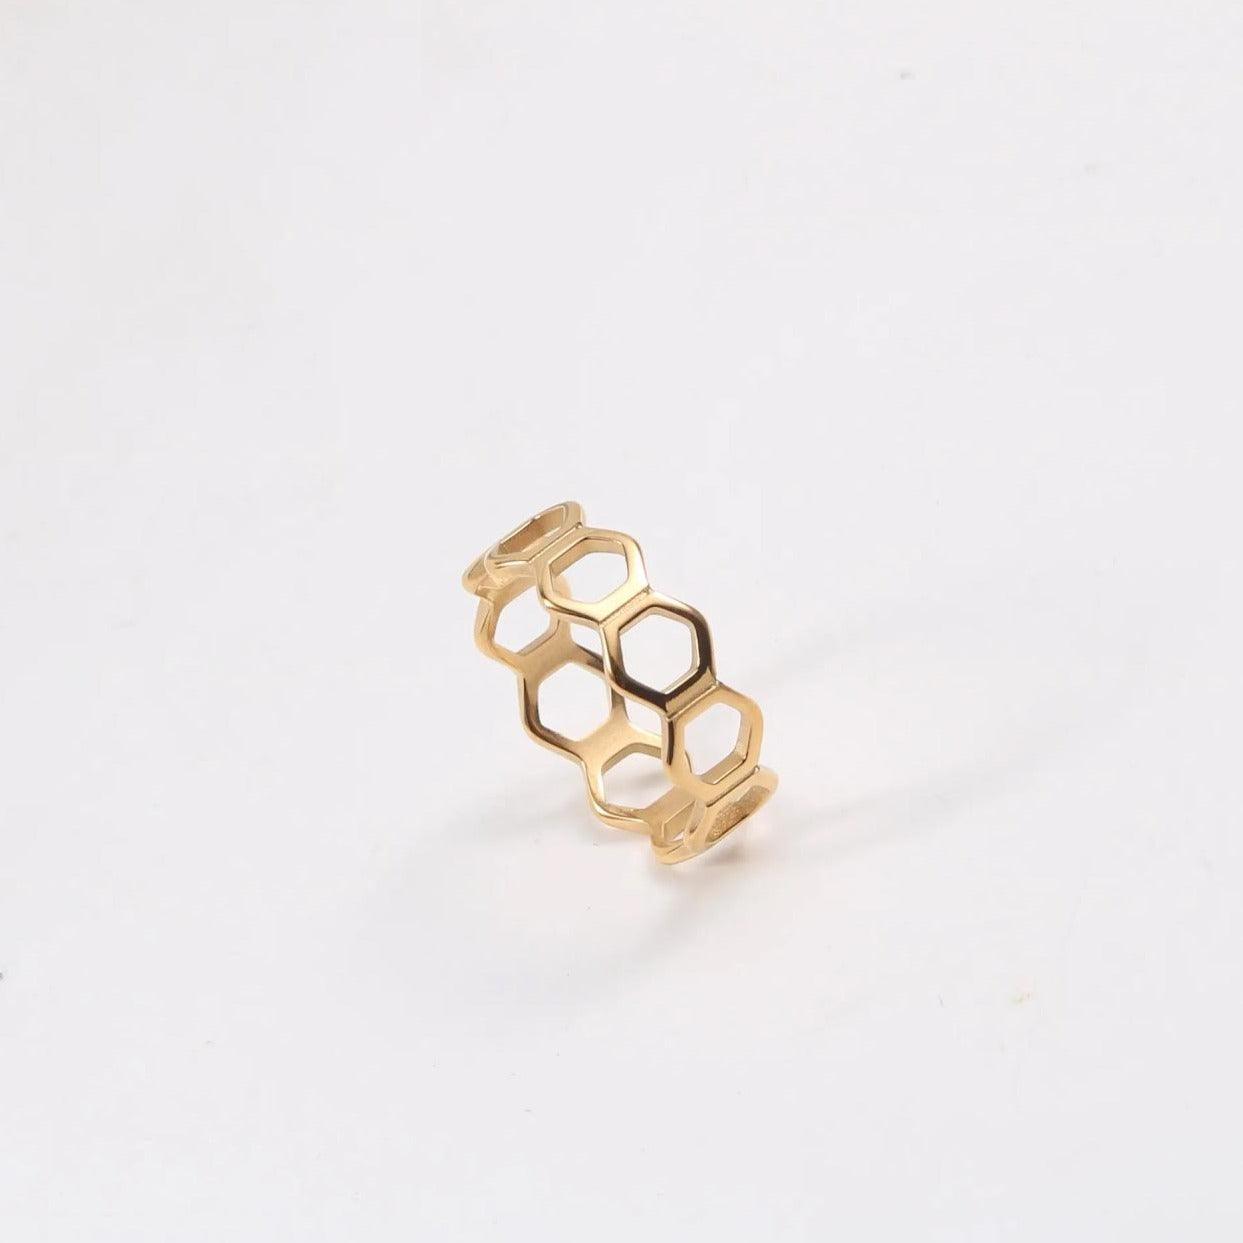 Easy to stack ring- womens everyday workwear jewelry ring